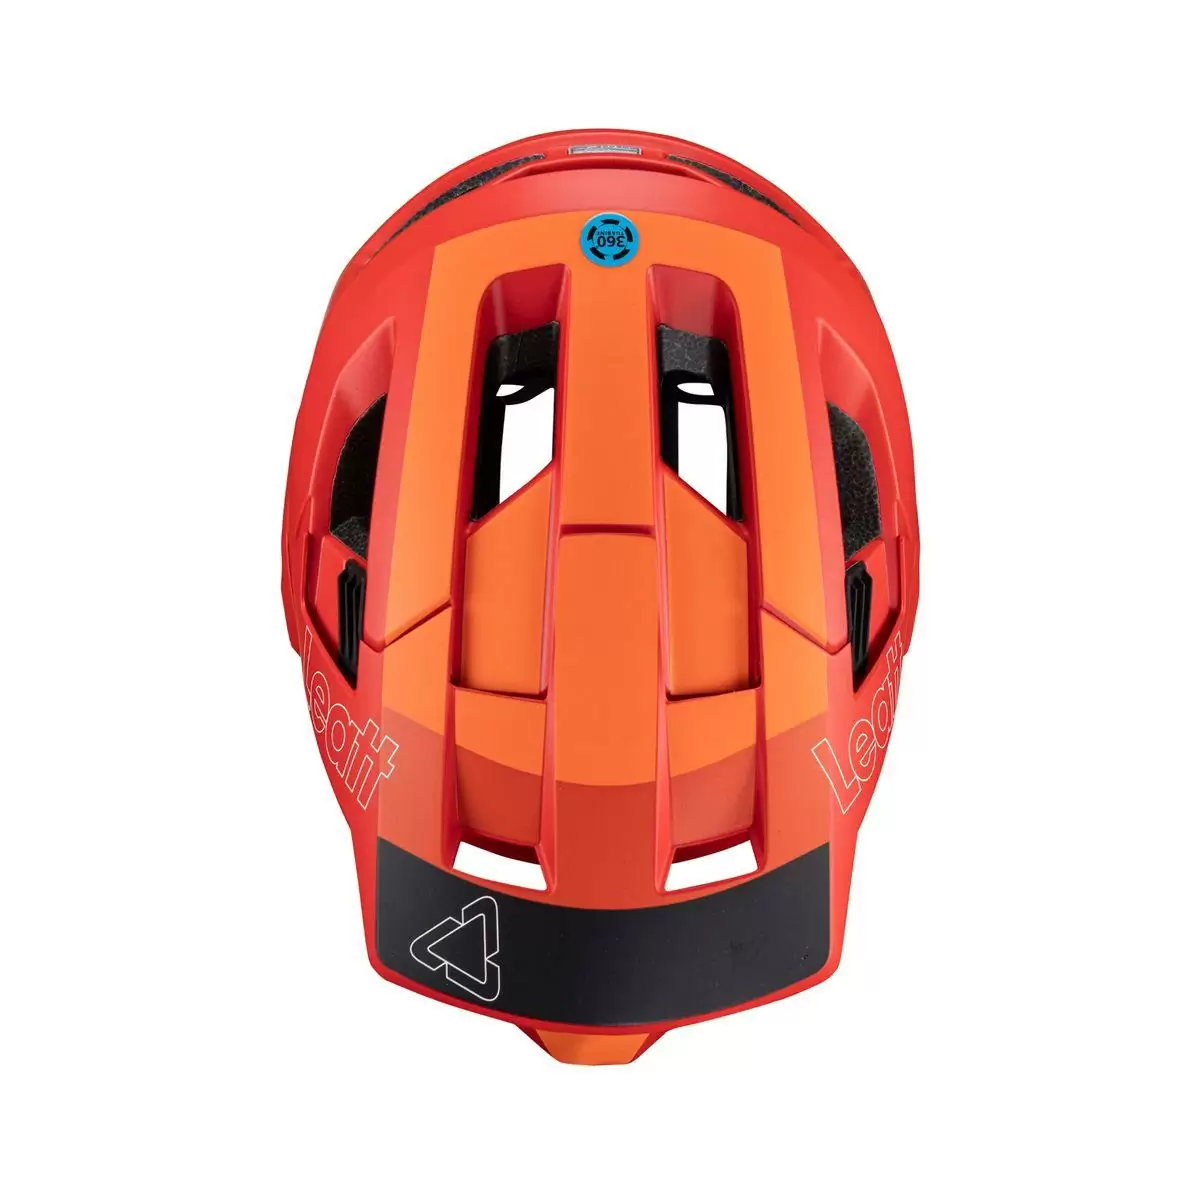 Leatt 1024120271 mtb enduro 40 helmet with removable chin guard red s